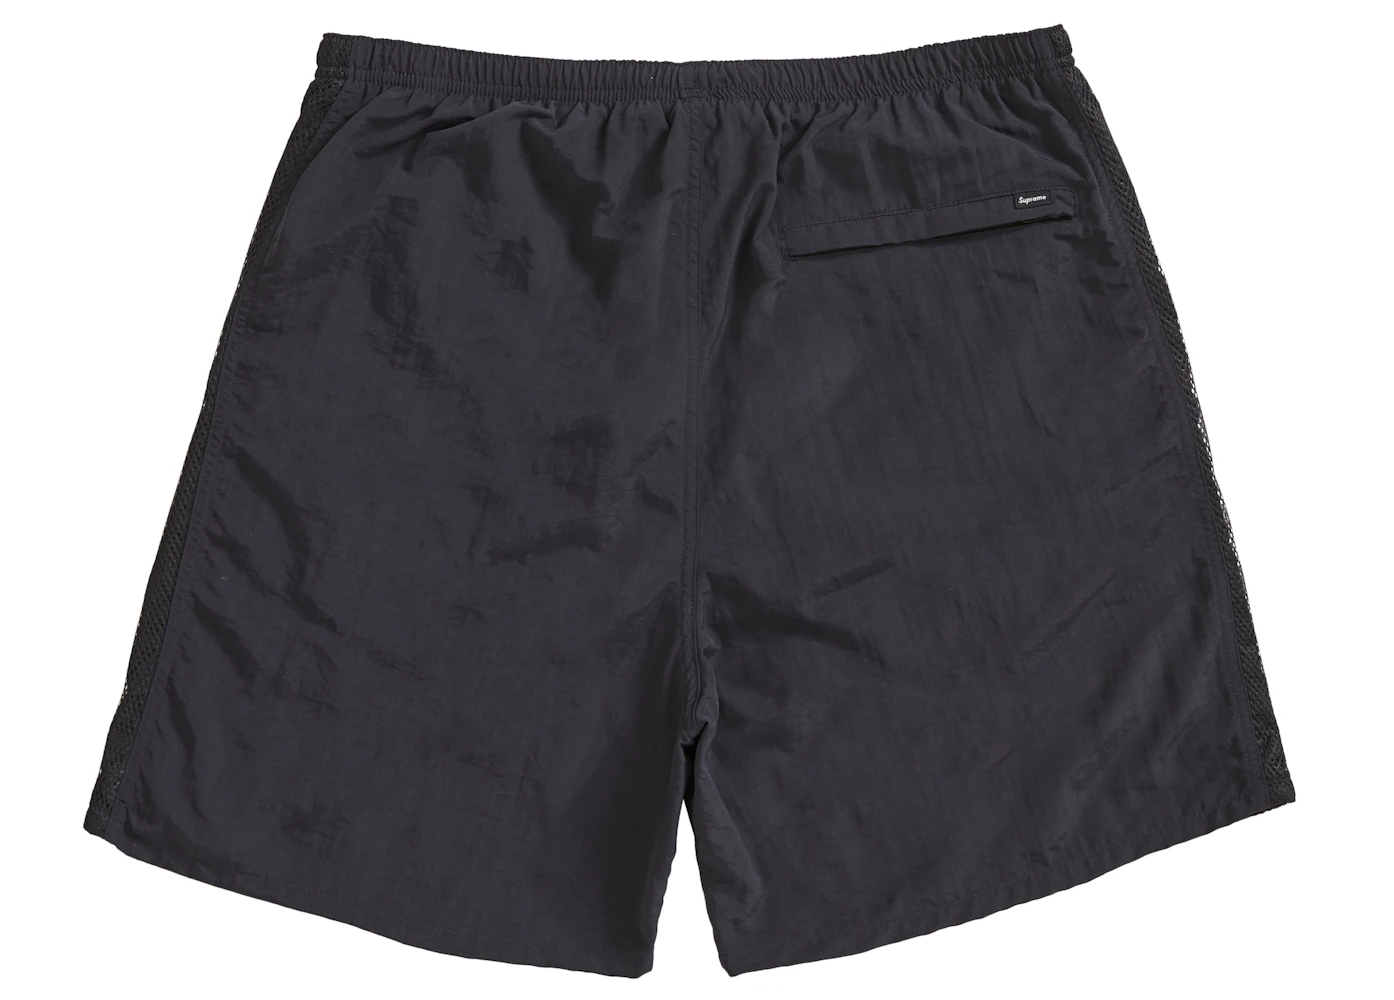 SS20 Supreme Nylon Water Shorts in Black Floral 